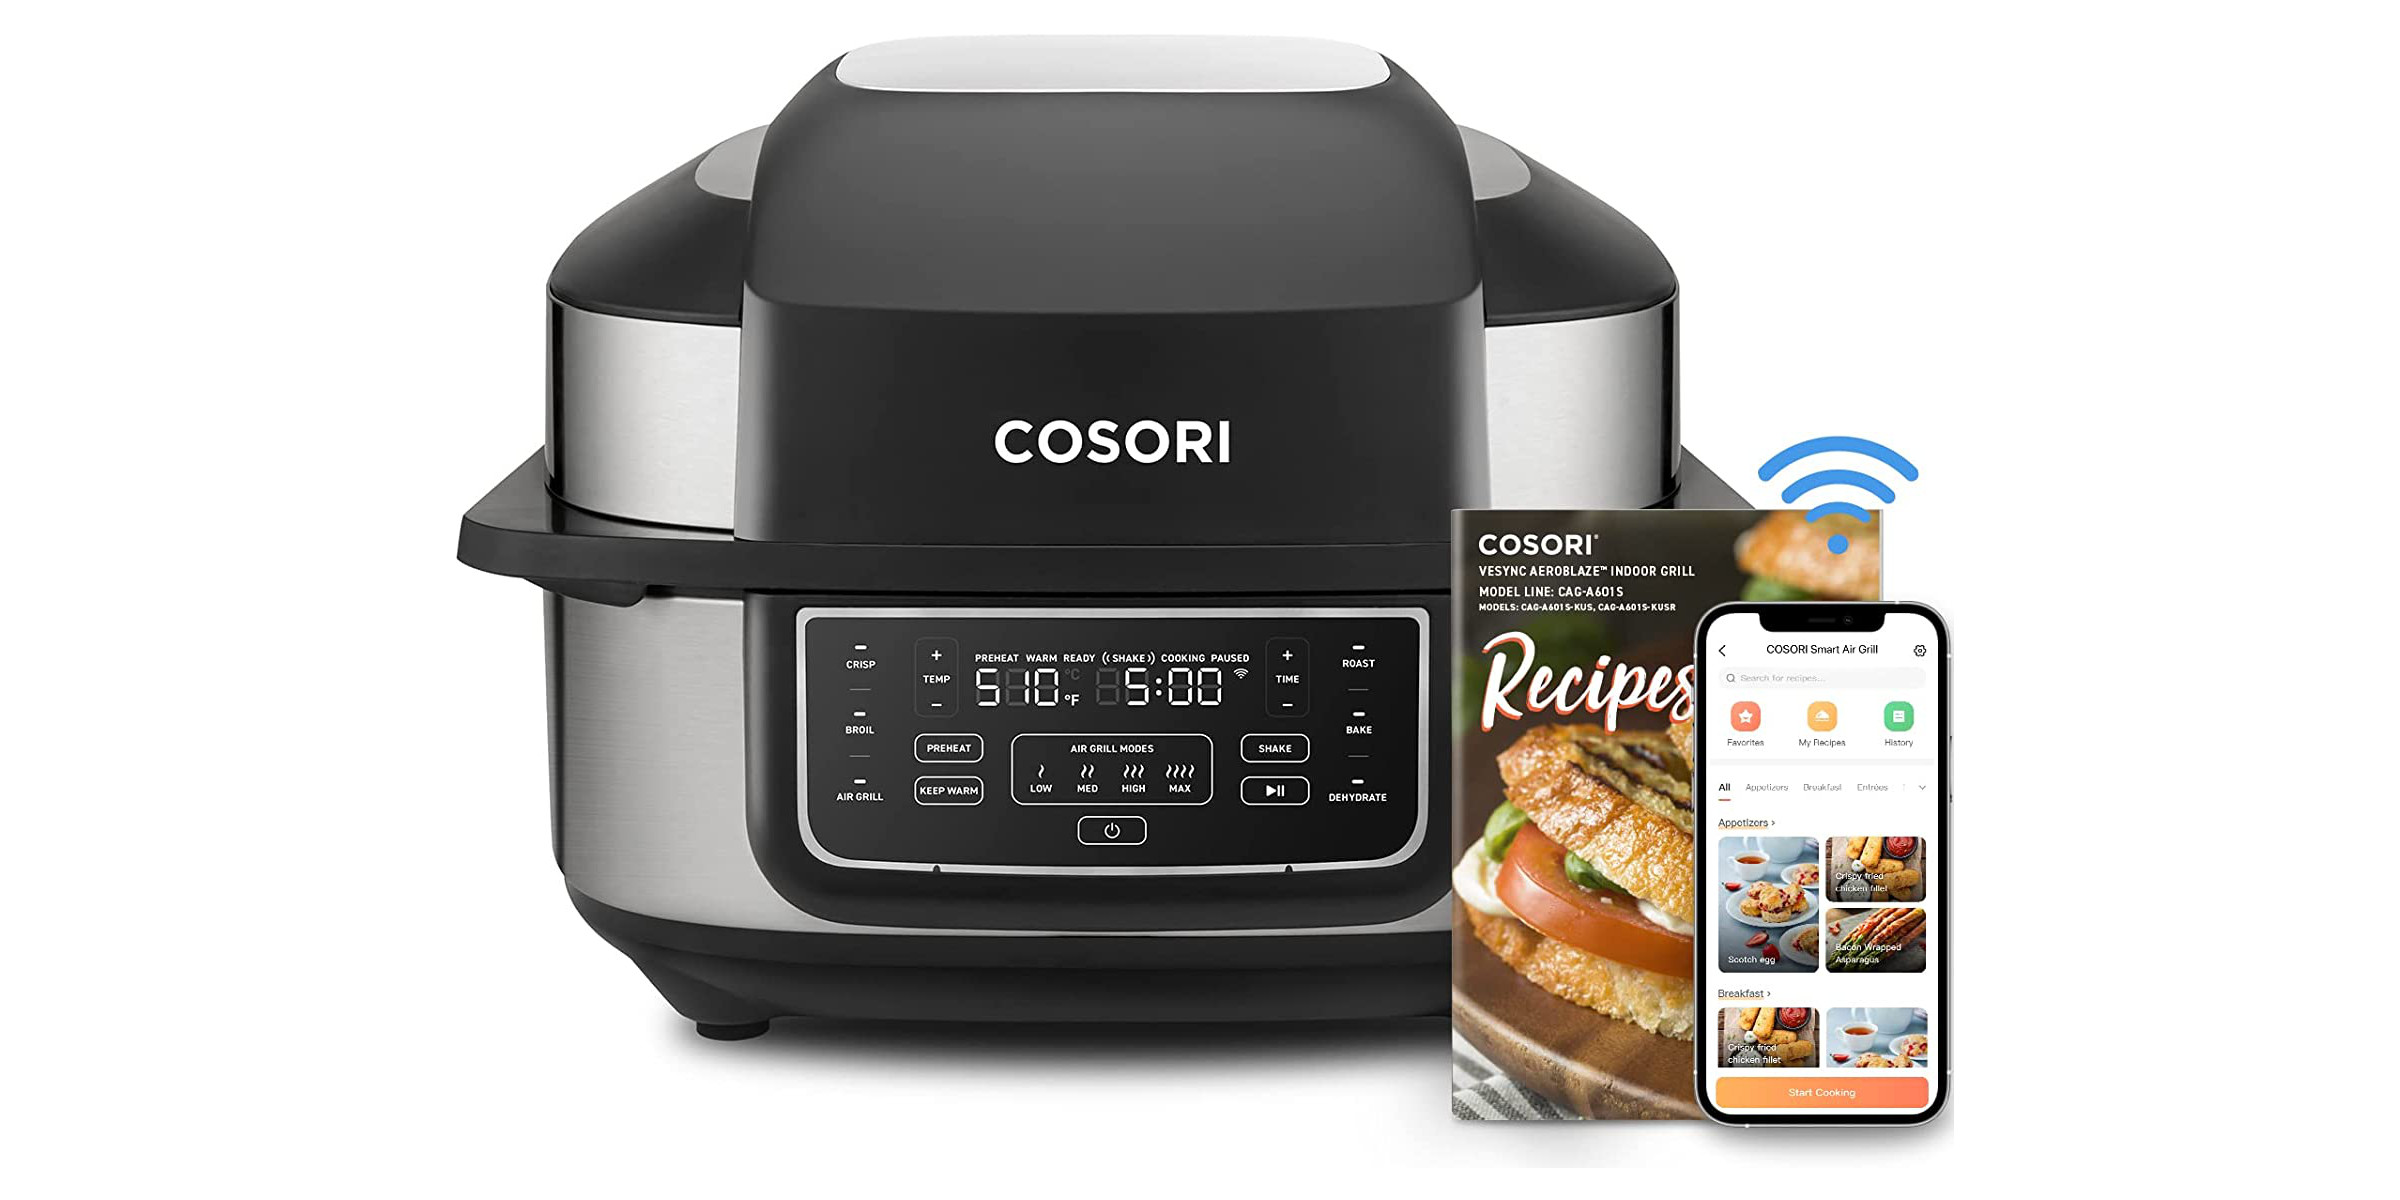 https://9to5toys.com/wp-content/uploads/sites/5/2022/10/COSORI-8-in-1-Indoor-Grill-and-Smart-XL-Air-Fryer-Combo.jpg